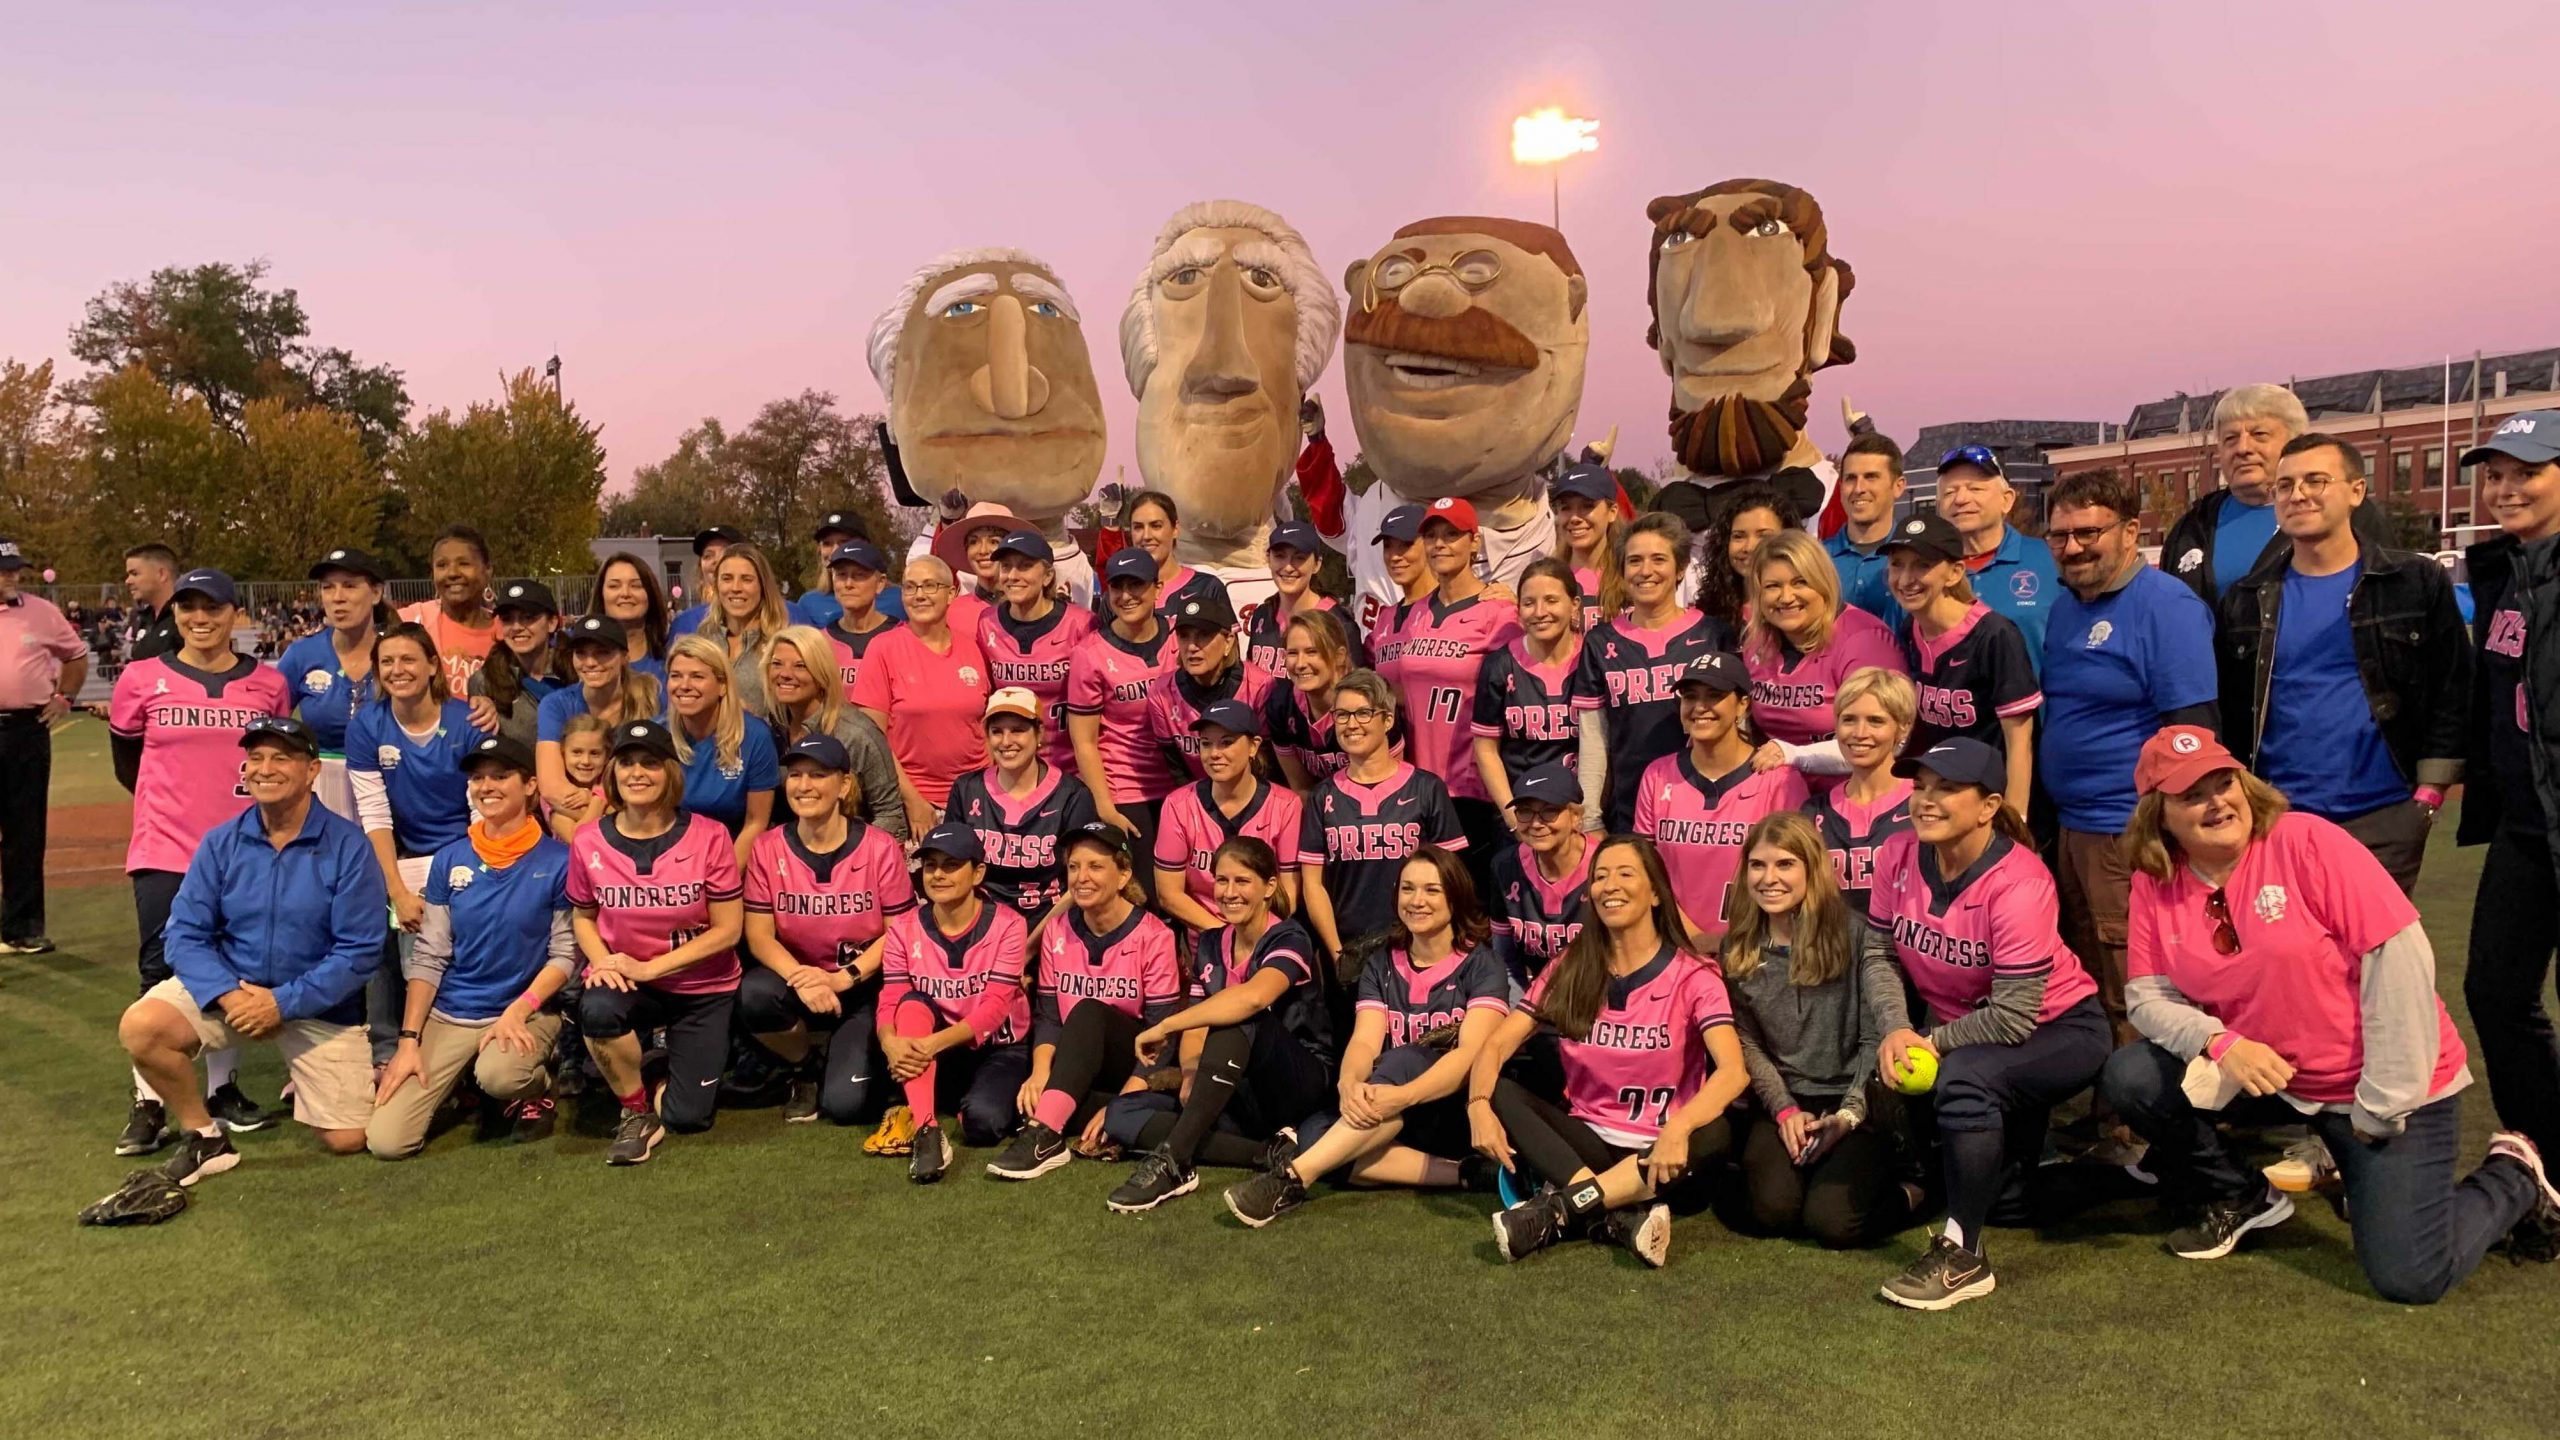 VIDEO The Return of the Congressional Women's Softball Game Medill